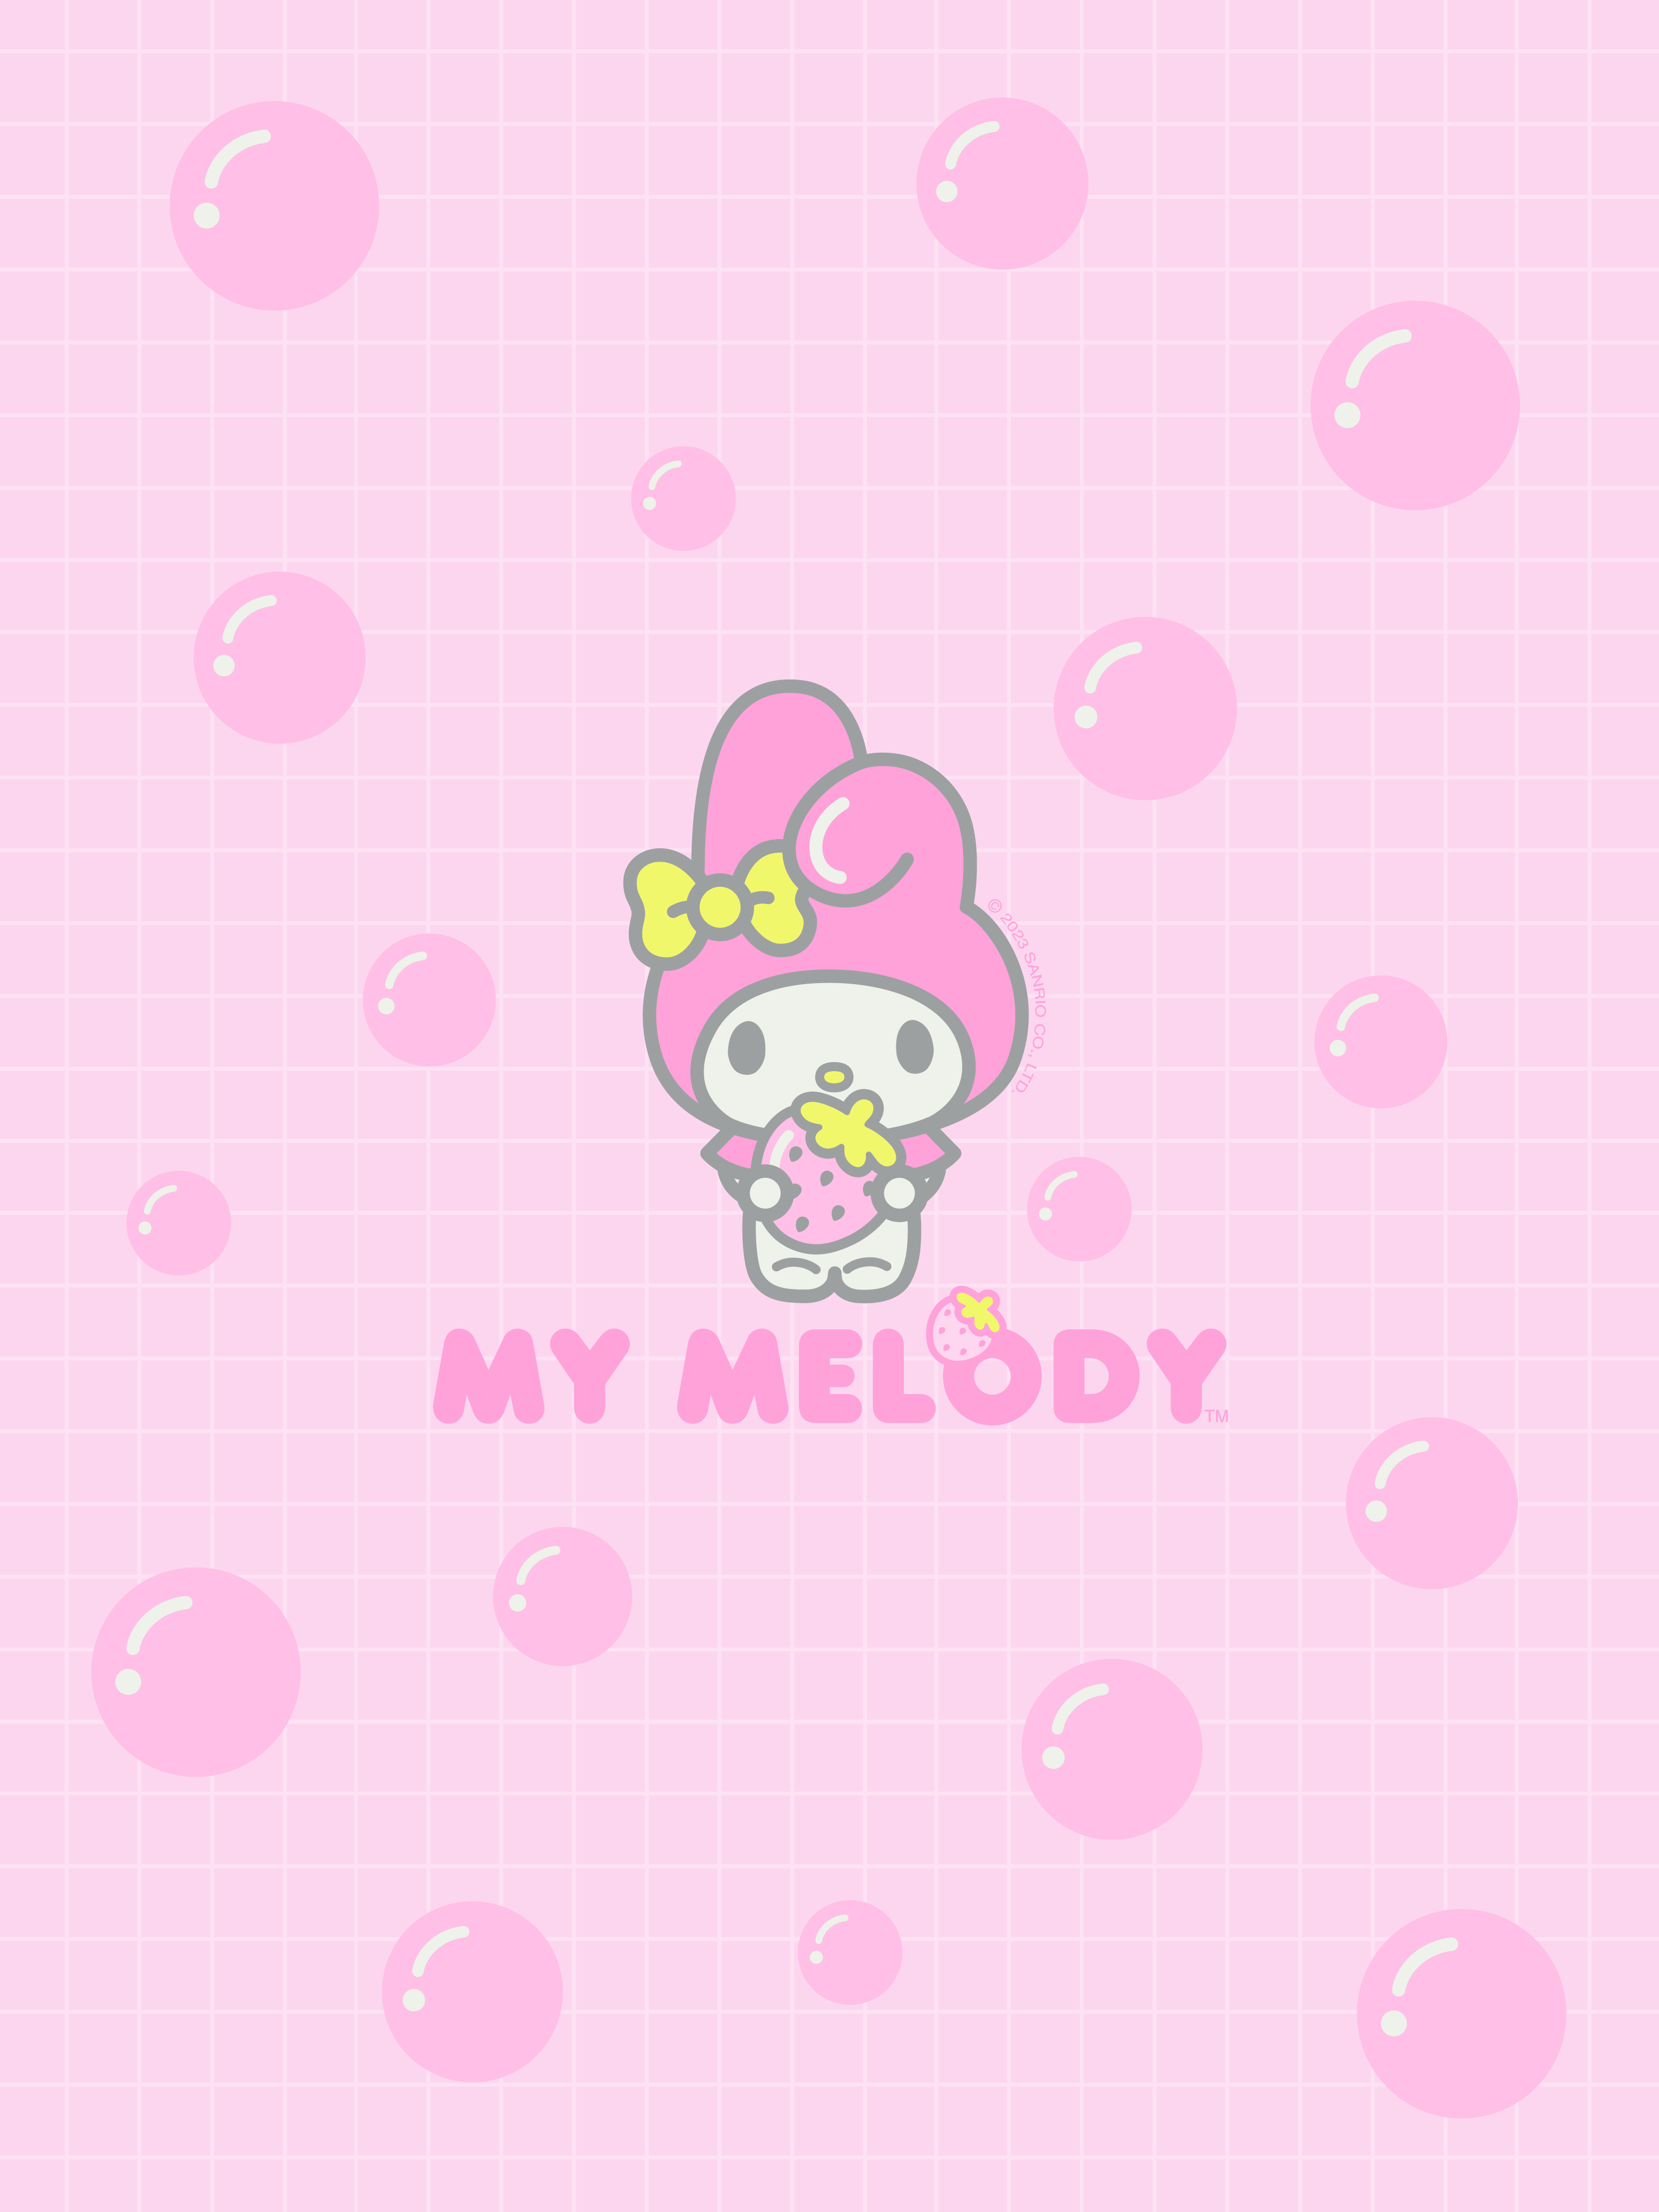 My Melody wallpaper for mobile devices. - Kuromi, Hello Kitty